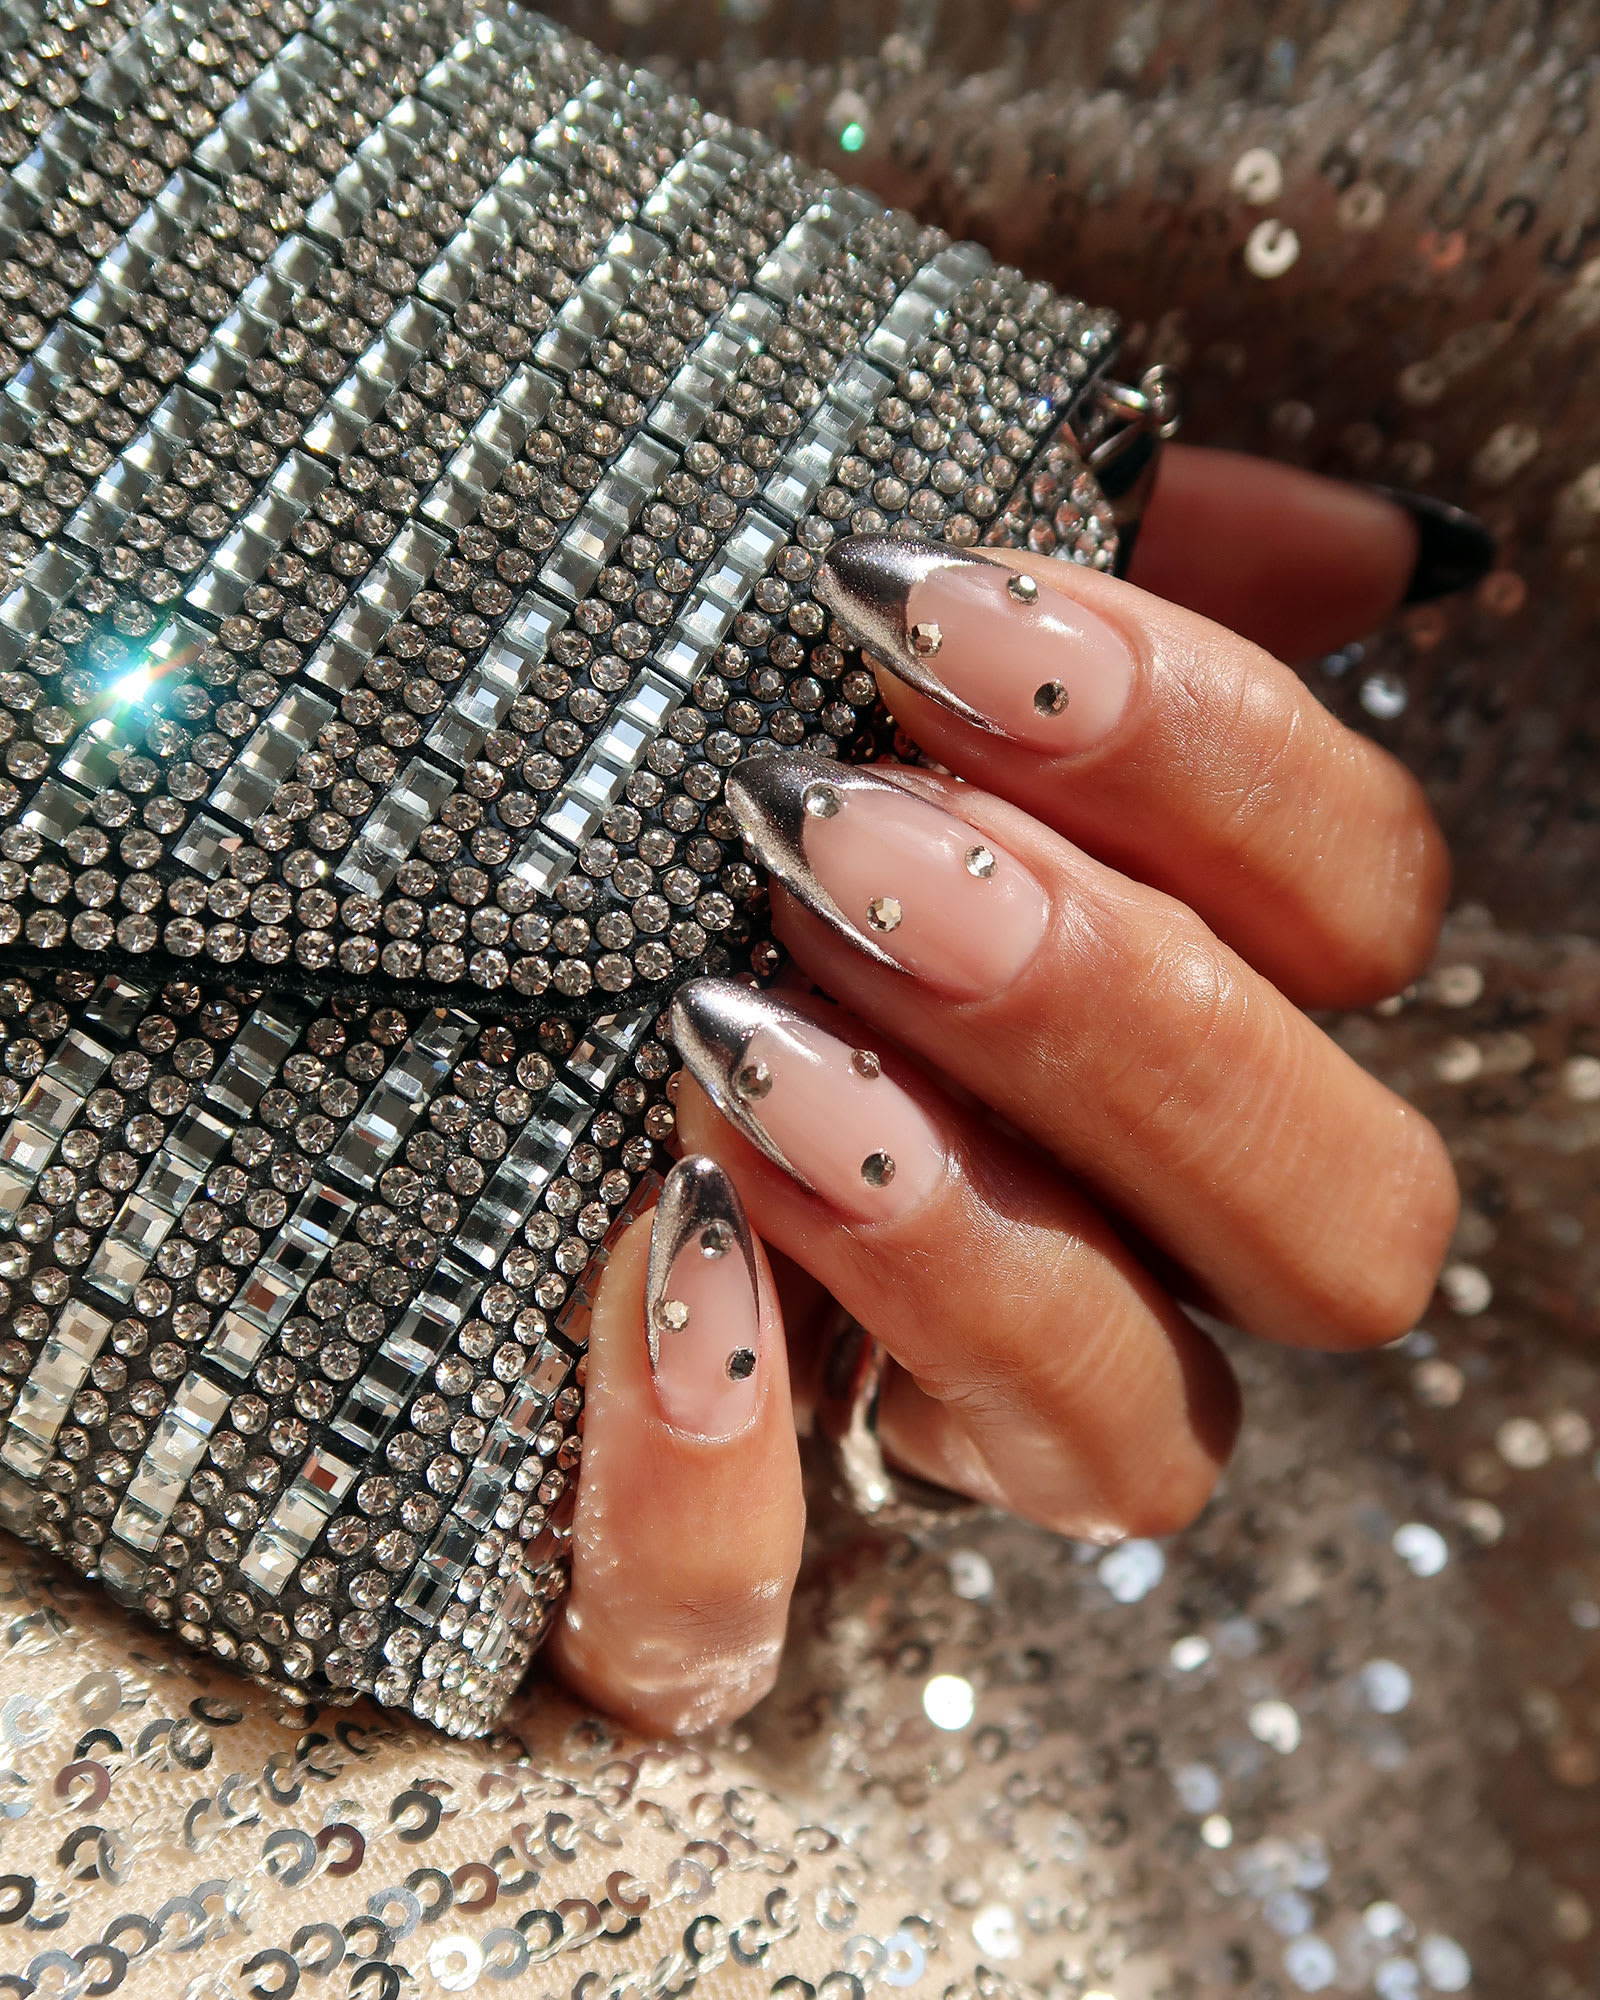 Get Holiday Glamour With Silver Chrome French Tip Nails - Lulus